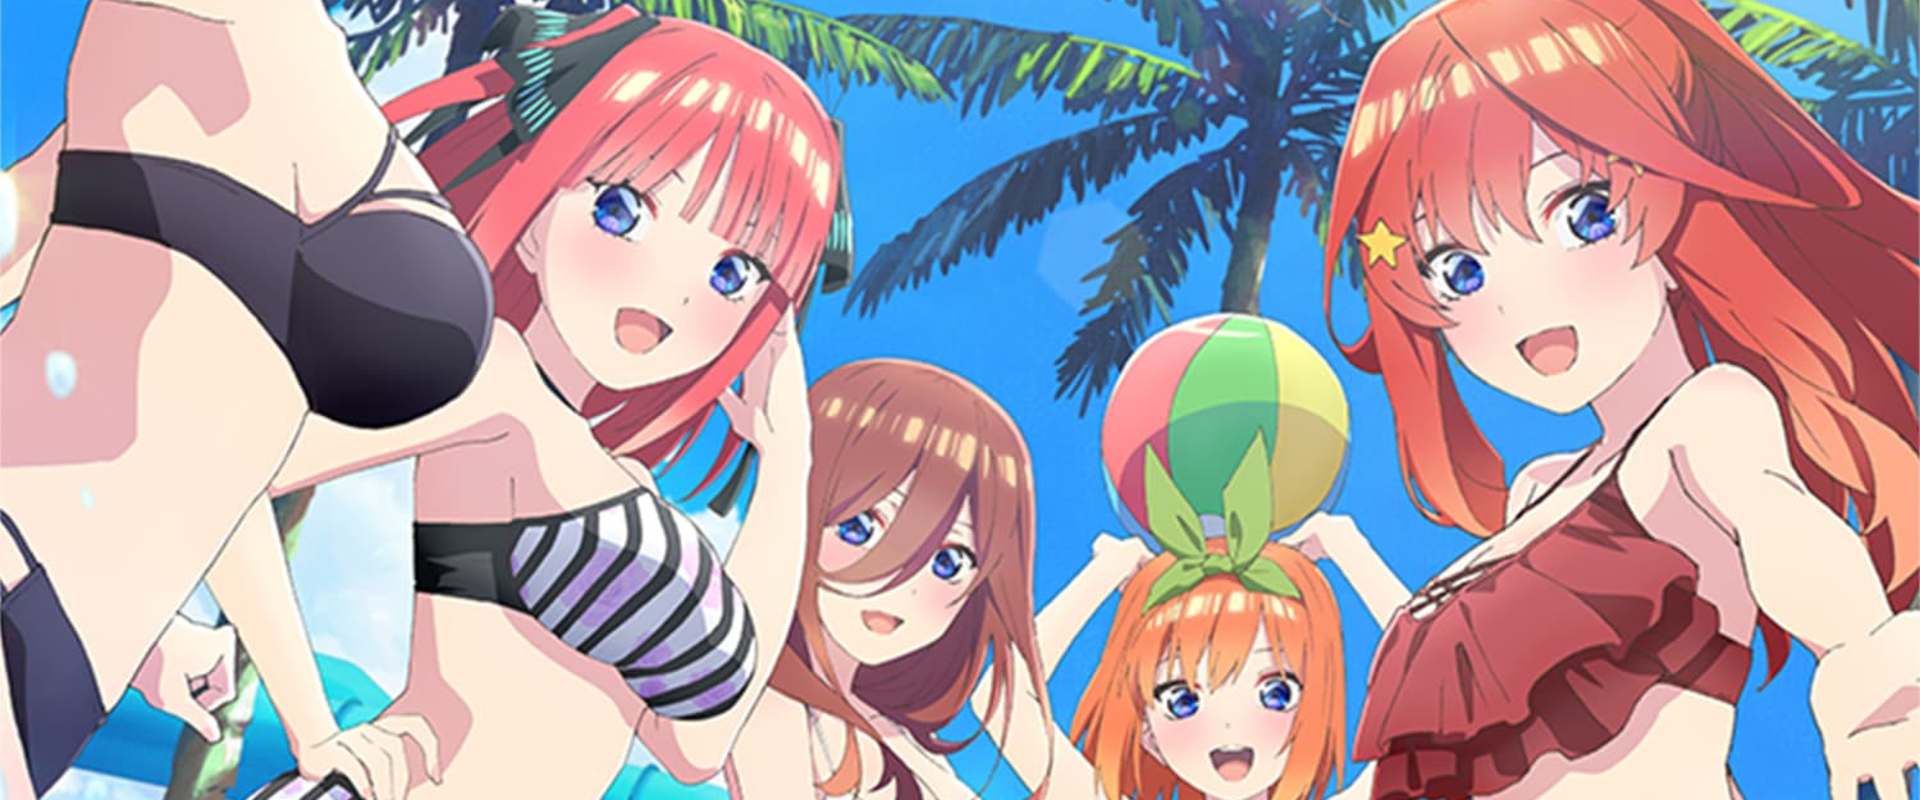 The Quintessential Quintuplets the Movie background 2